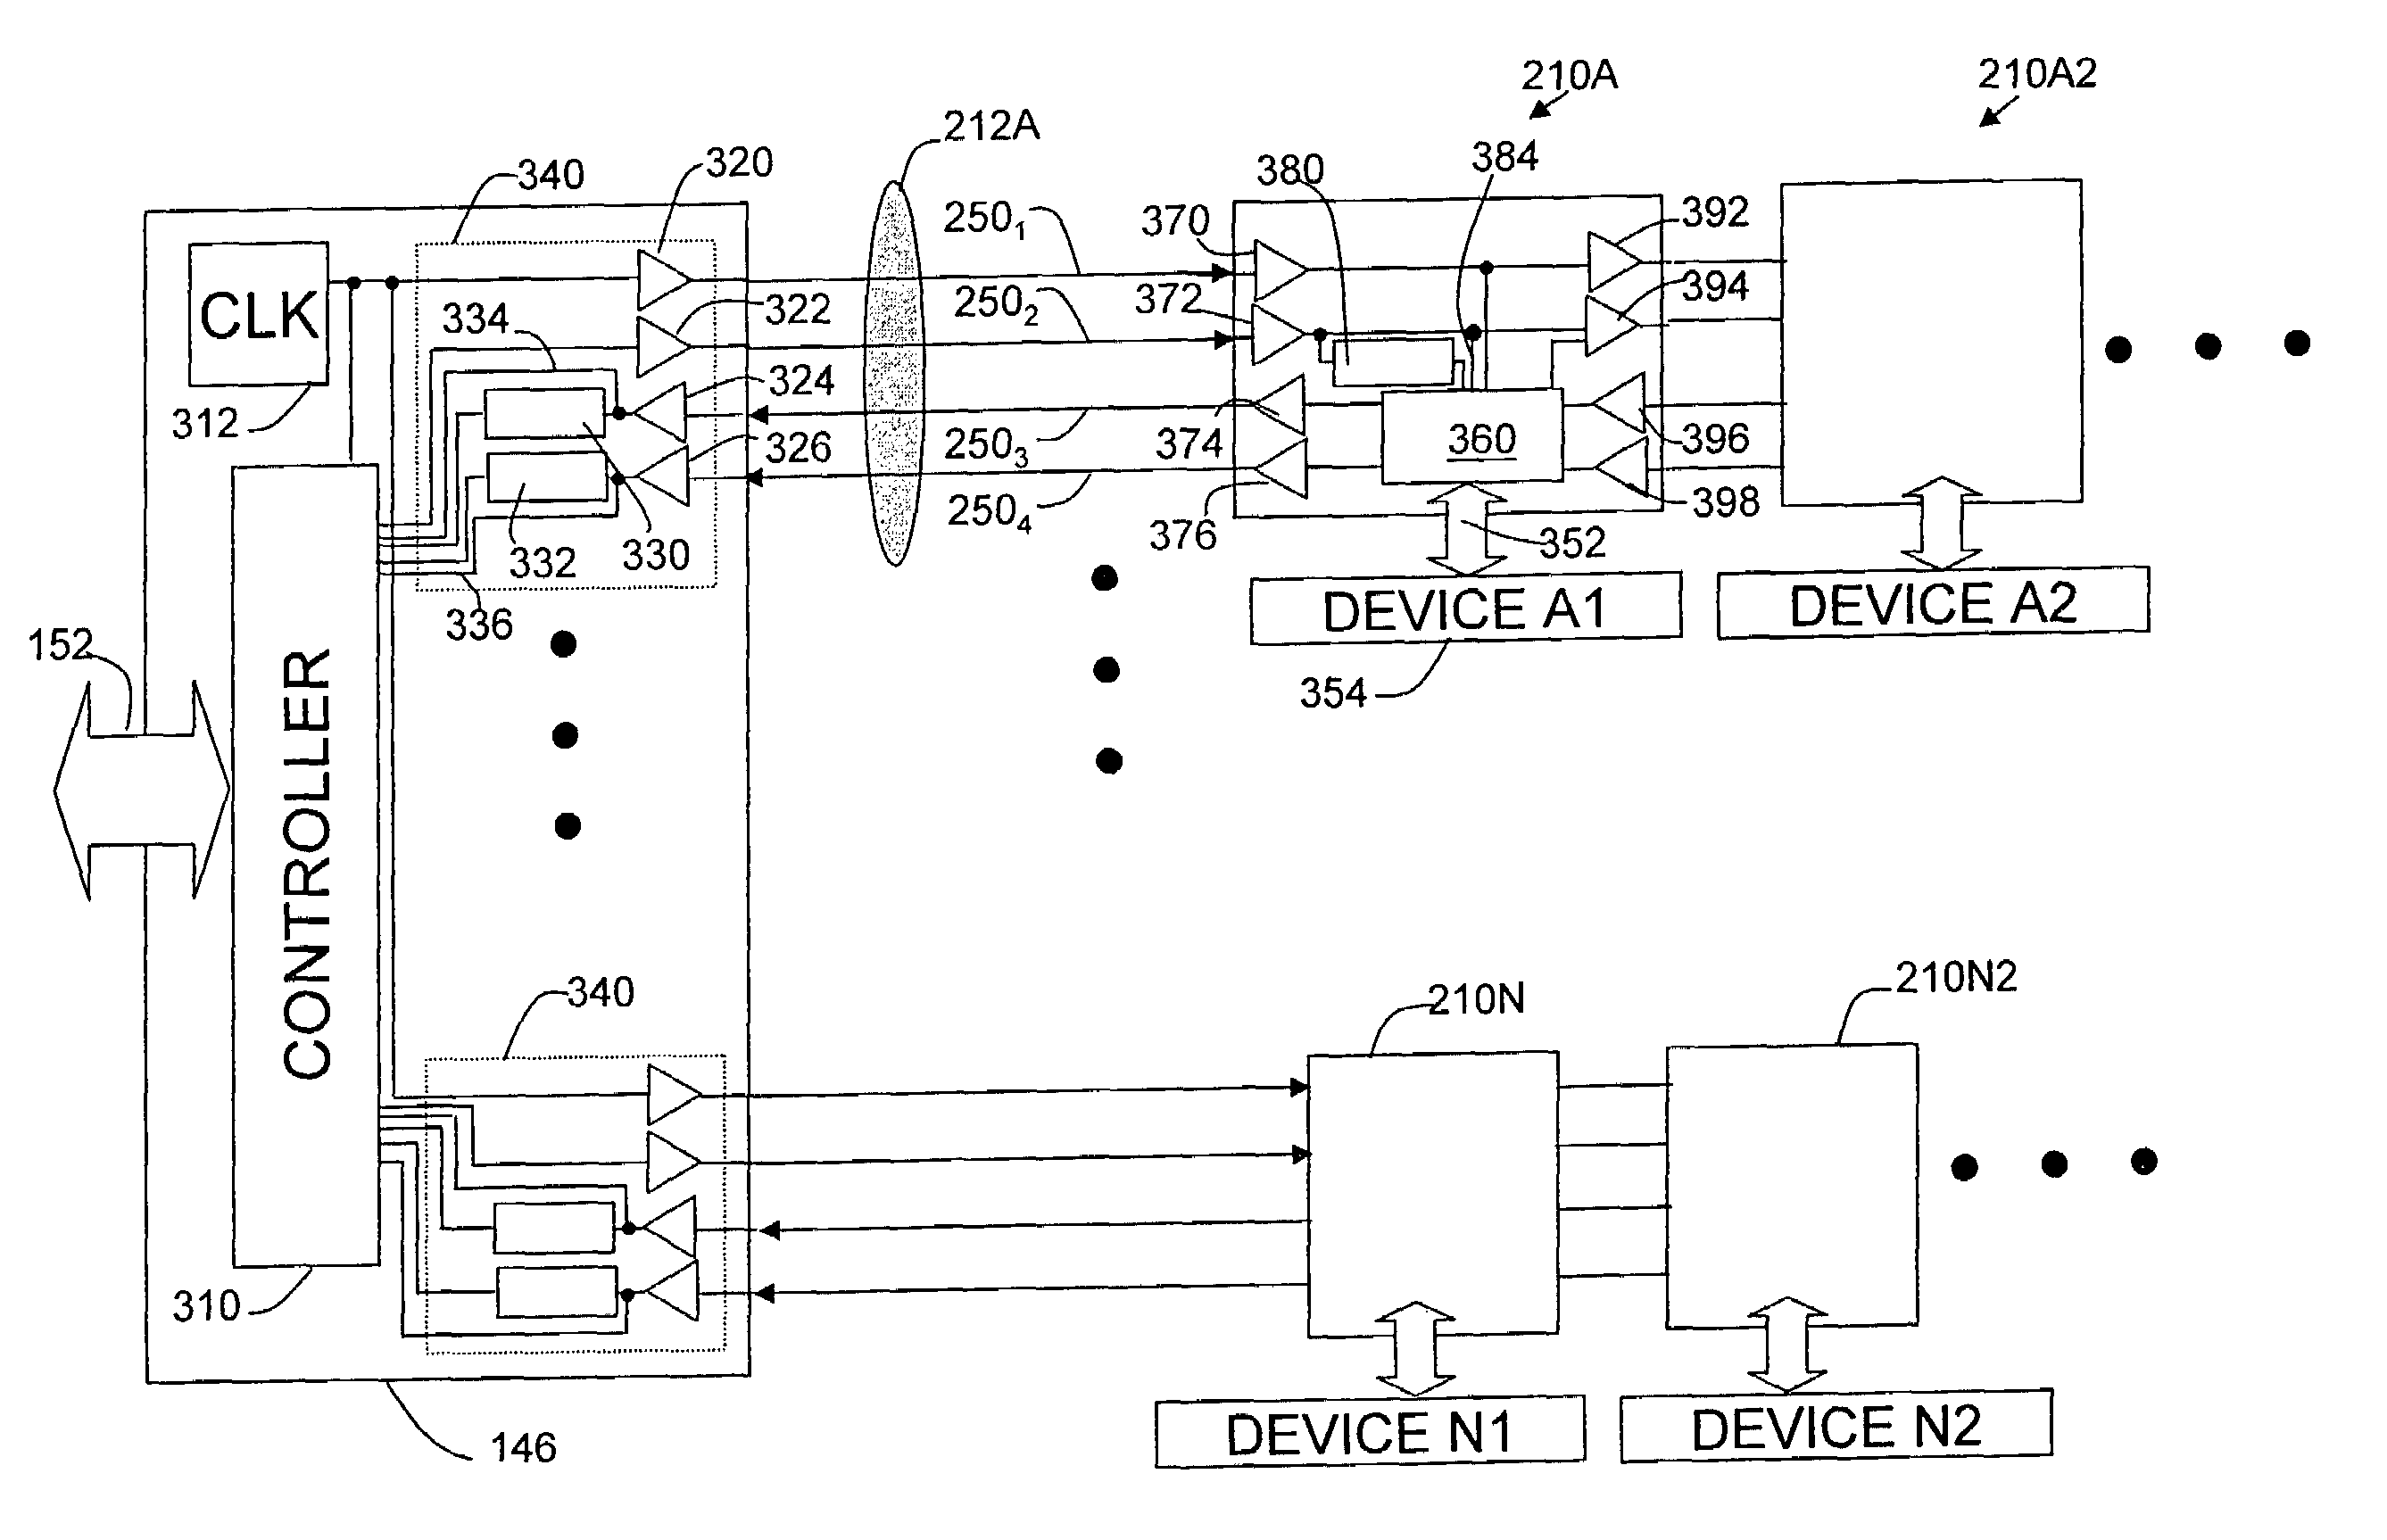 Inspection system with data acquisition system interconnect protocol